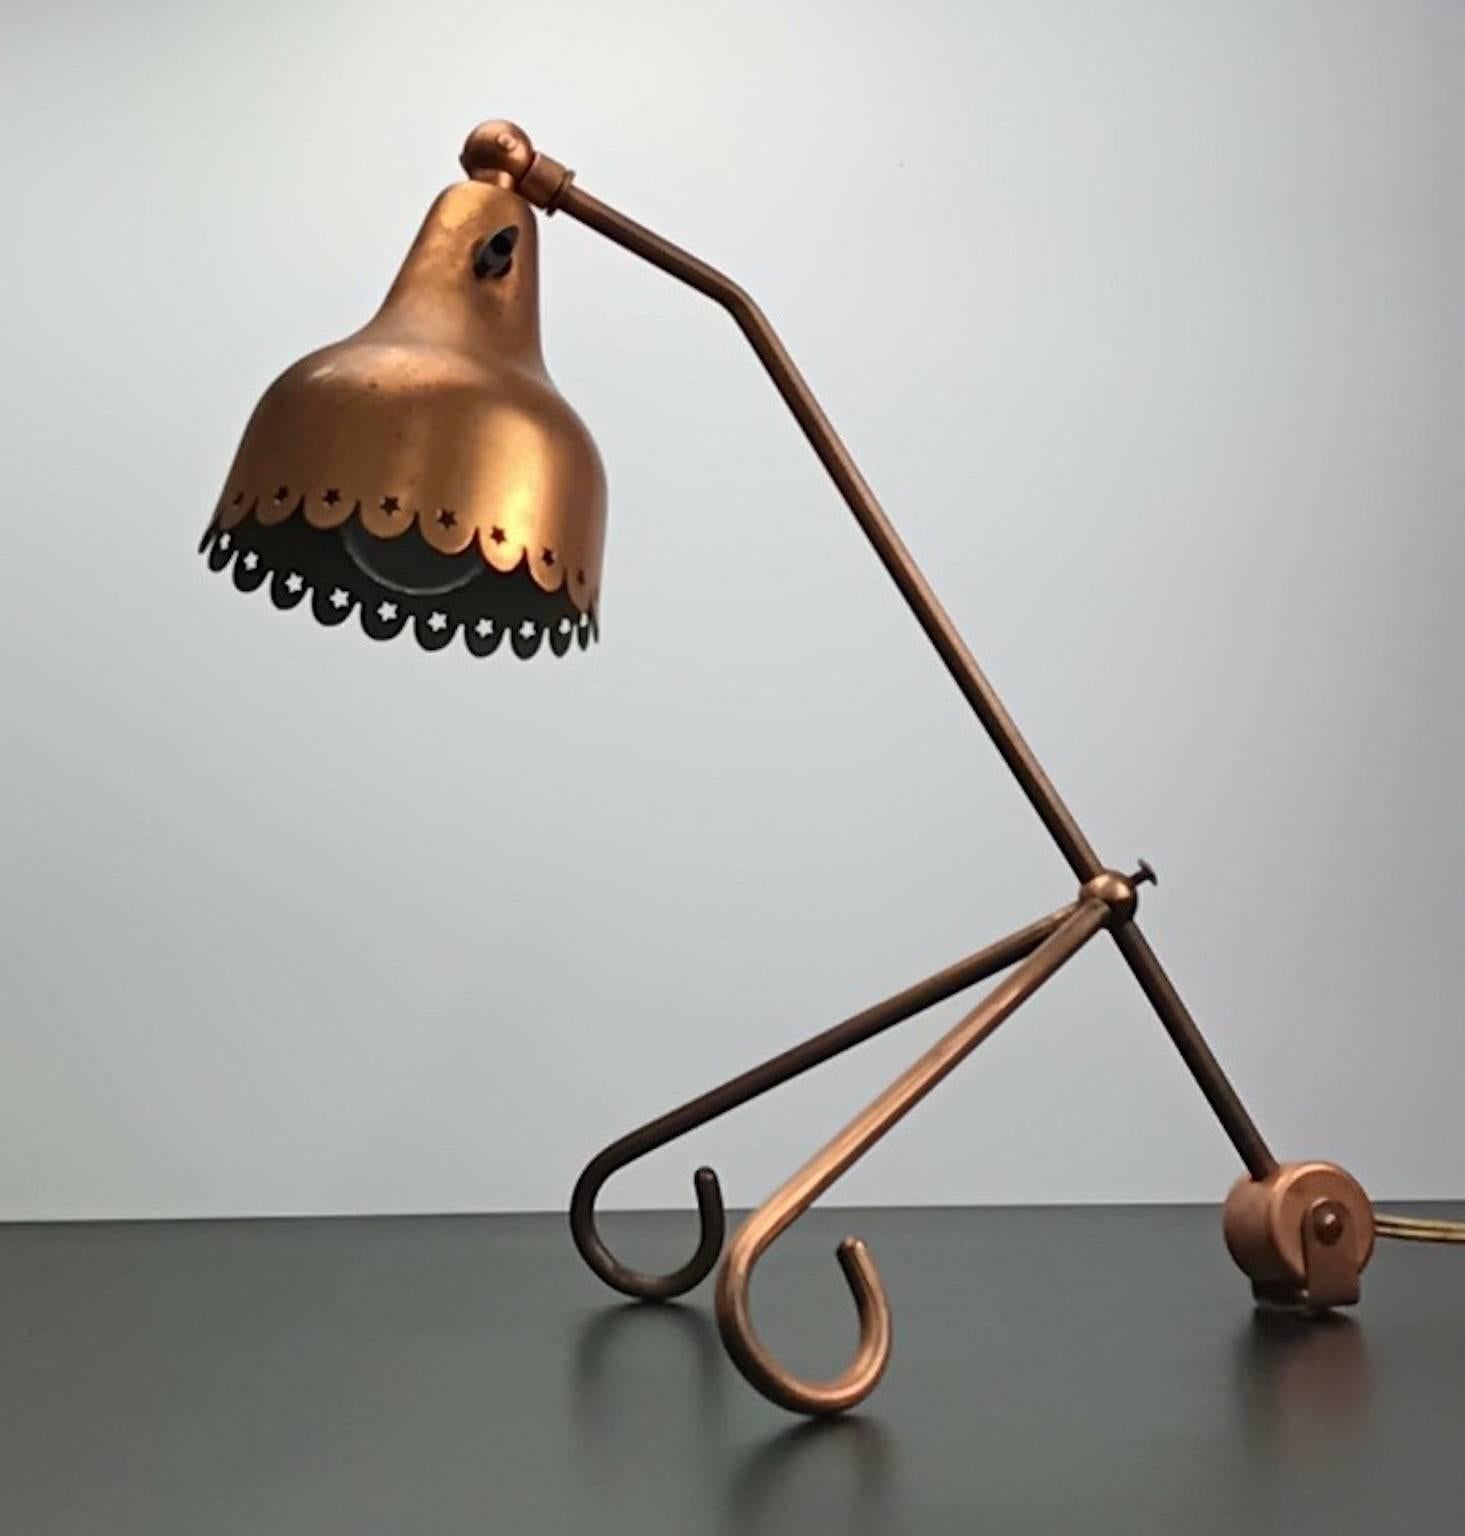 Danish Copper Table Lamp by Svens Aage Holm Sørensen, Late 1950s